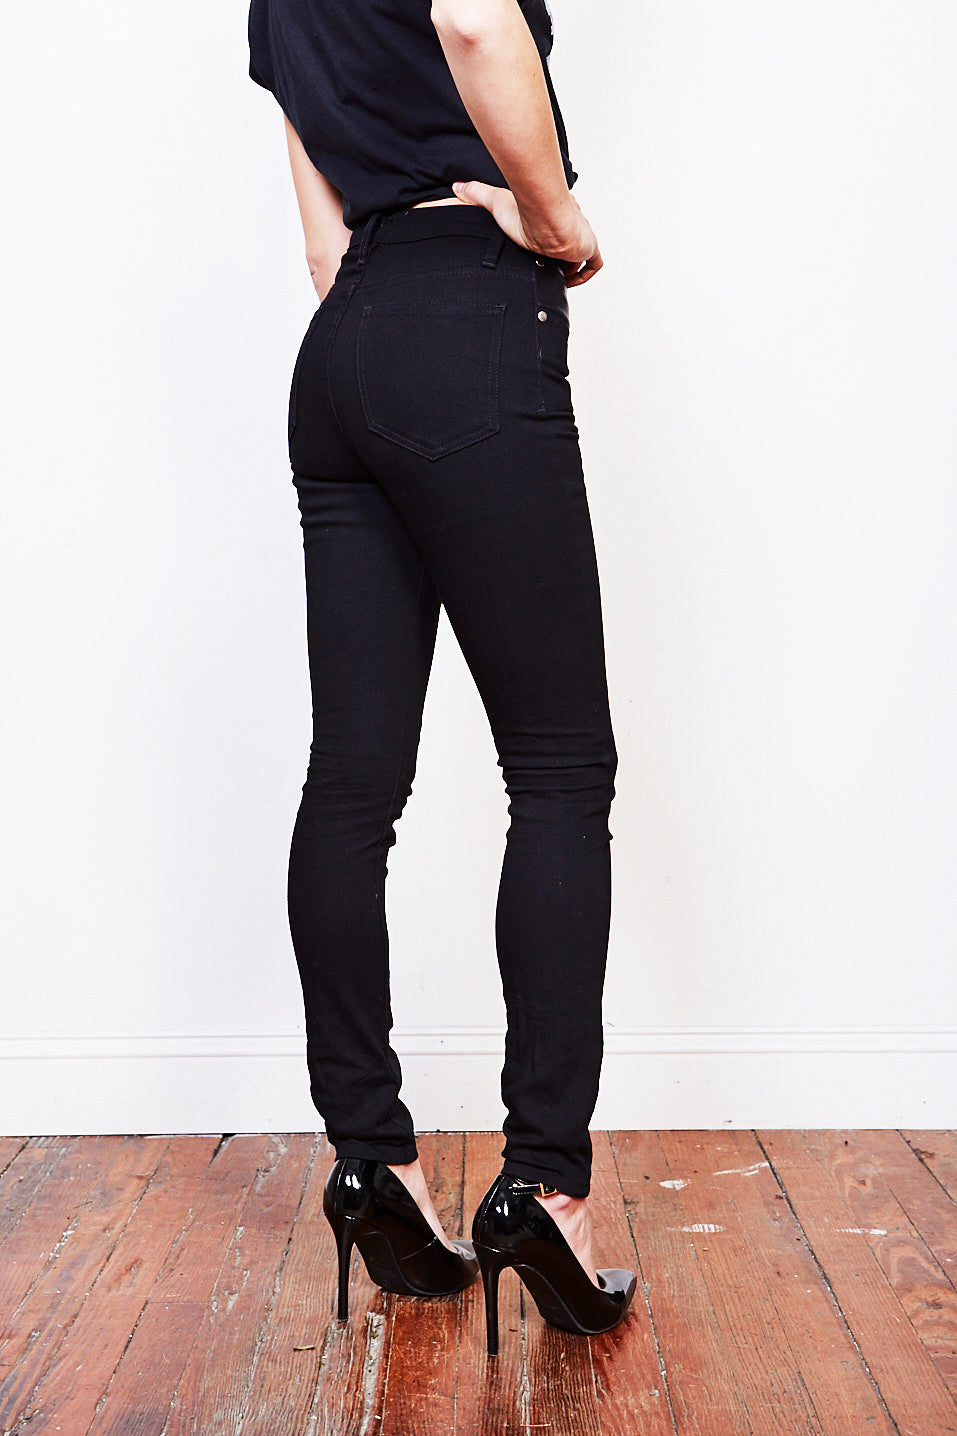 WOMEN'S HIGH + TIGHT JEANS